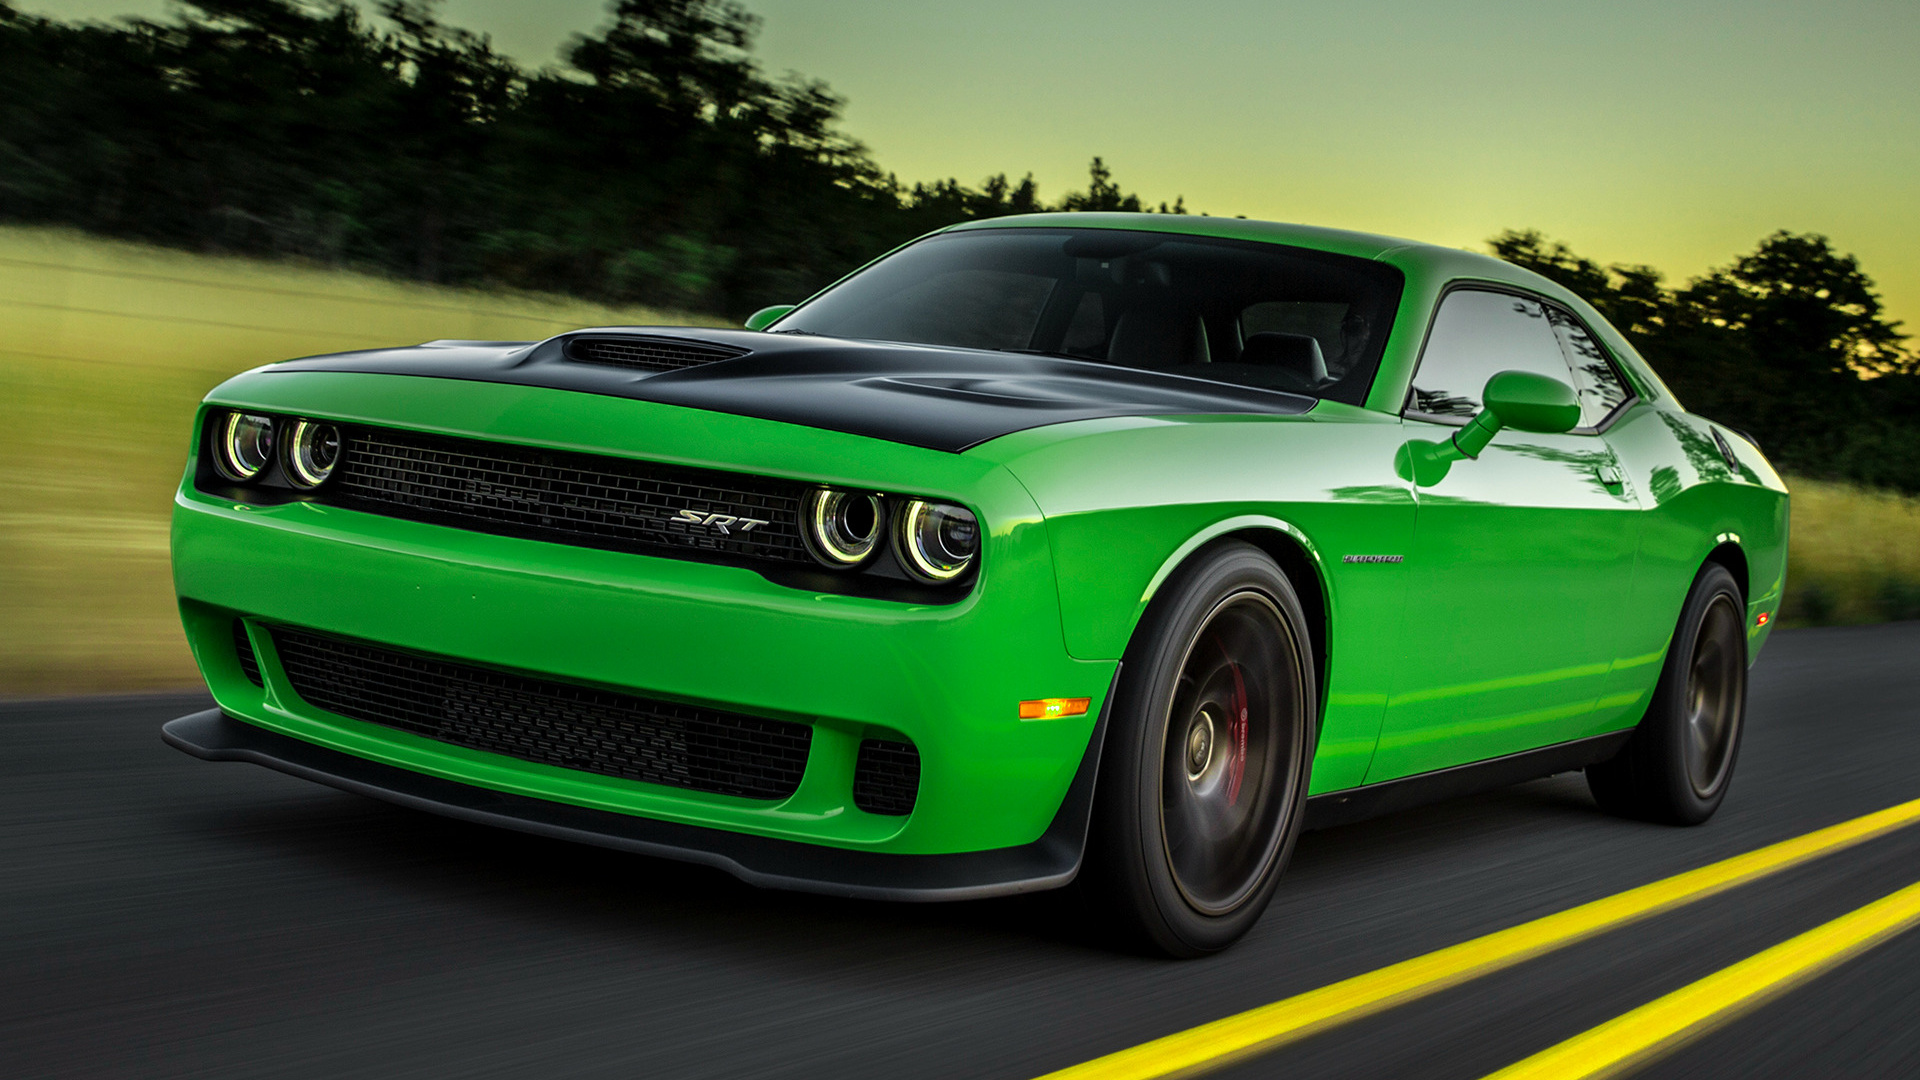 Dodge Challenger SRT Hellcat 2015 Wallpapers and HD Images